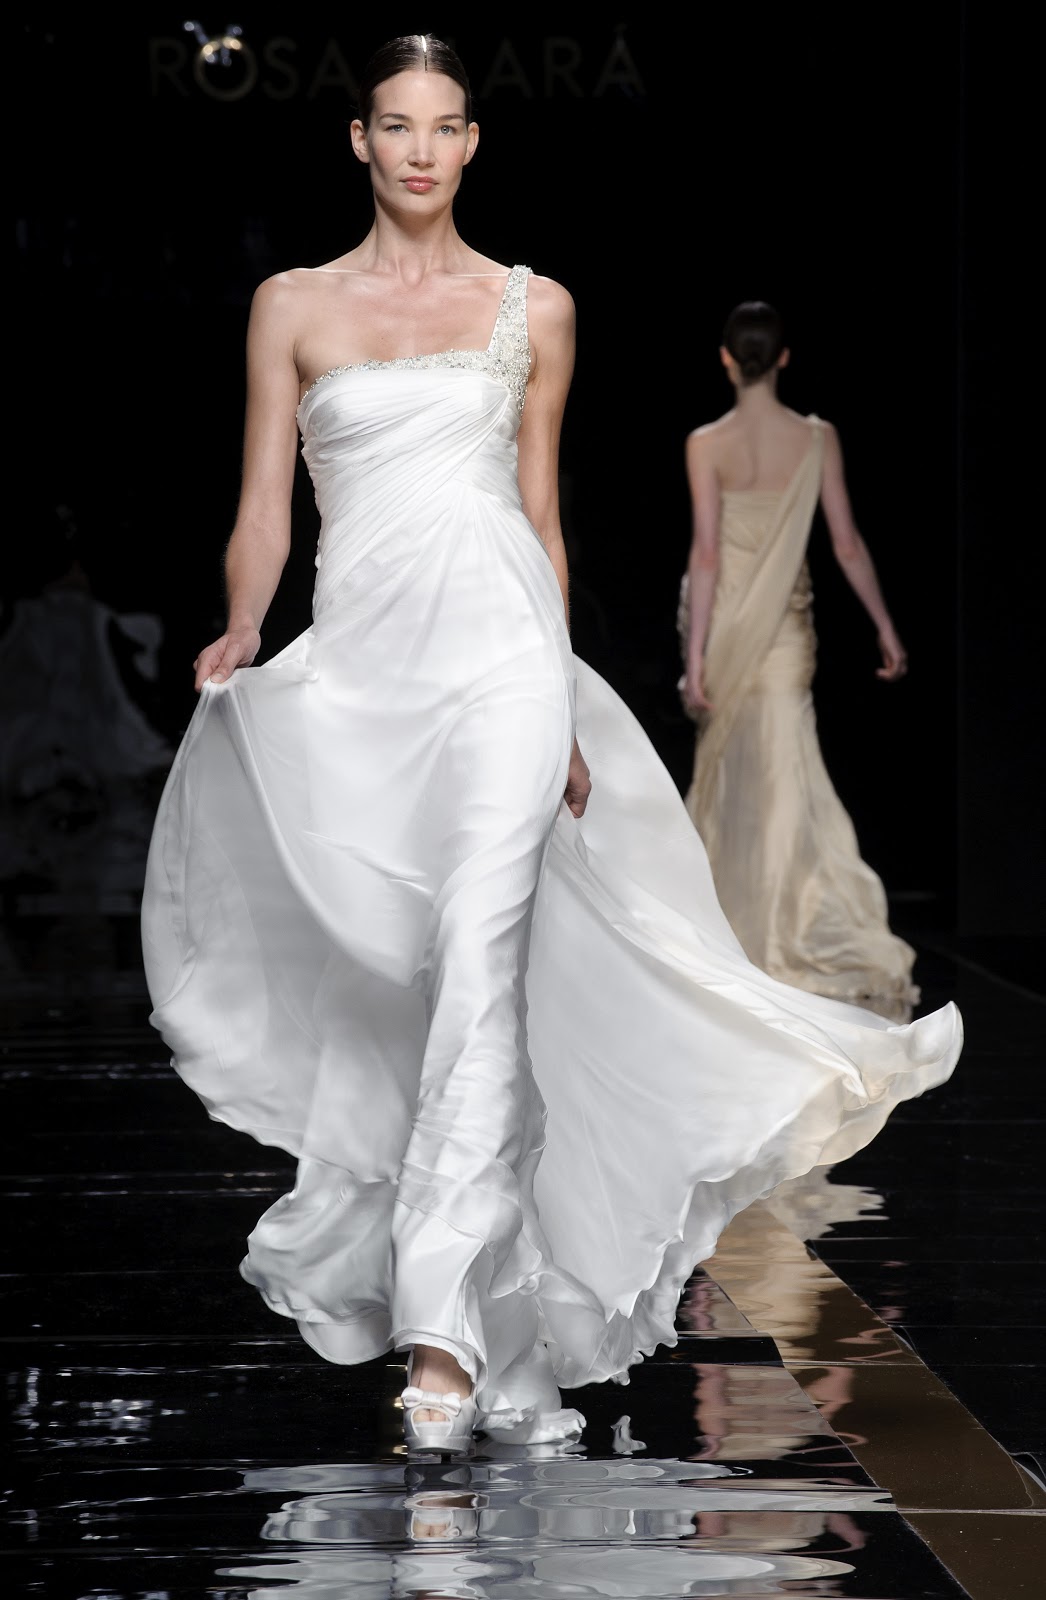 ... is Over. How to Sell Your Wedding Dress on Consignment in Atlanta, Ga